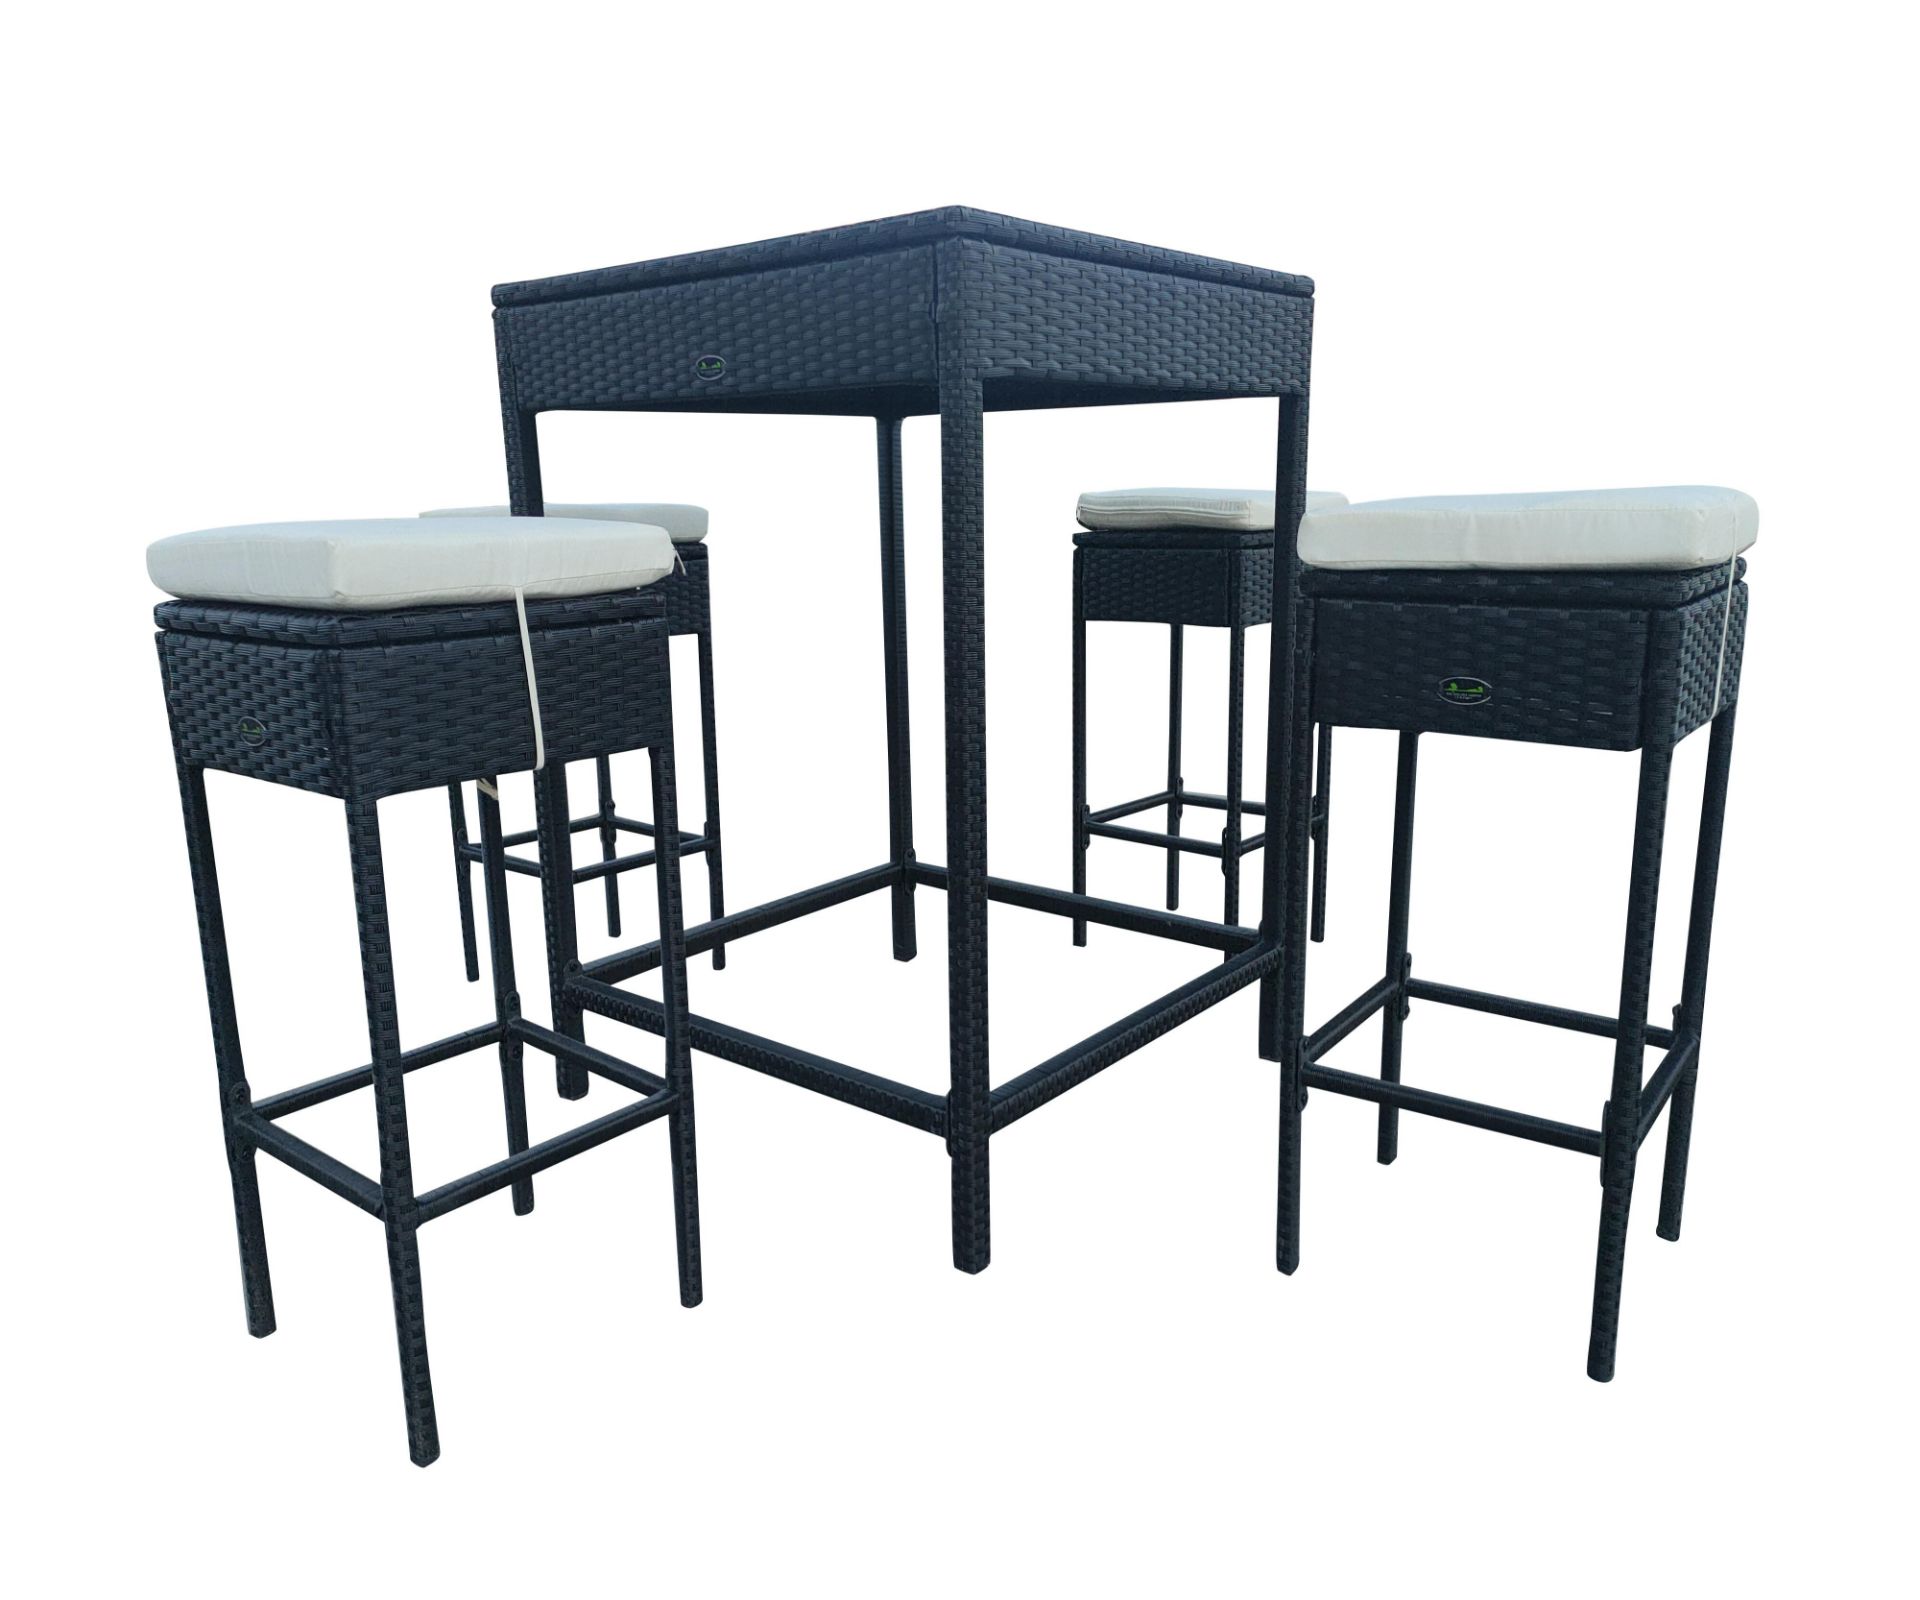 + VAT Brand New Chelsea Garden Company Brown Rattan Four Person Bar Stool And Table Set - Item Is - Image 2 of 4